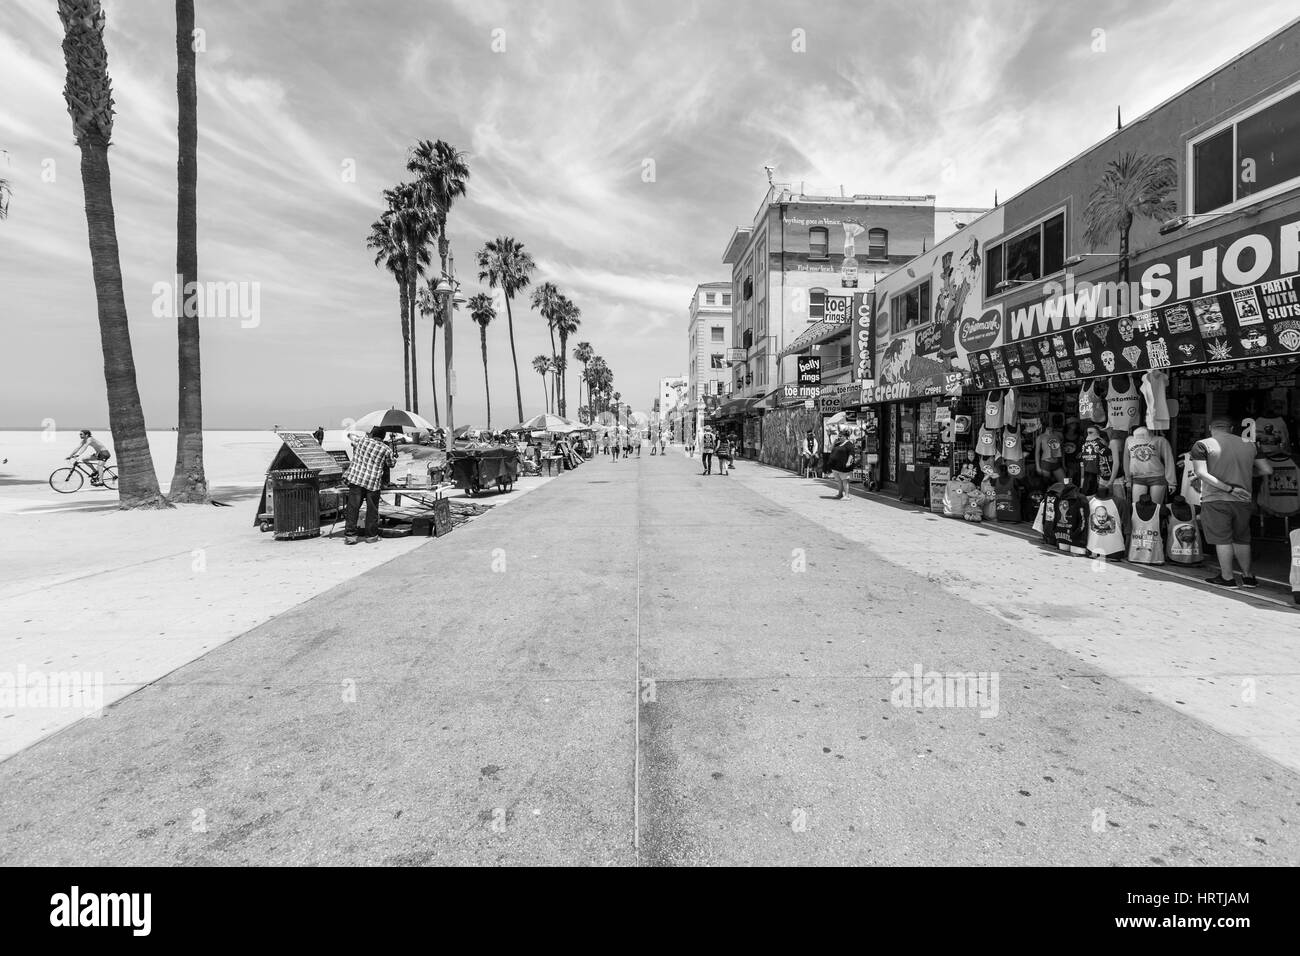 Los Angeles, California, USA - June 20, 2014:  Editorial black and white photo of famously funky Venice Beach board walk in Los Angeles. Stock Photo